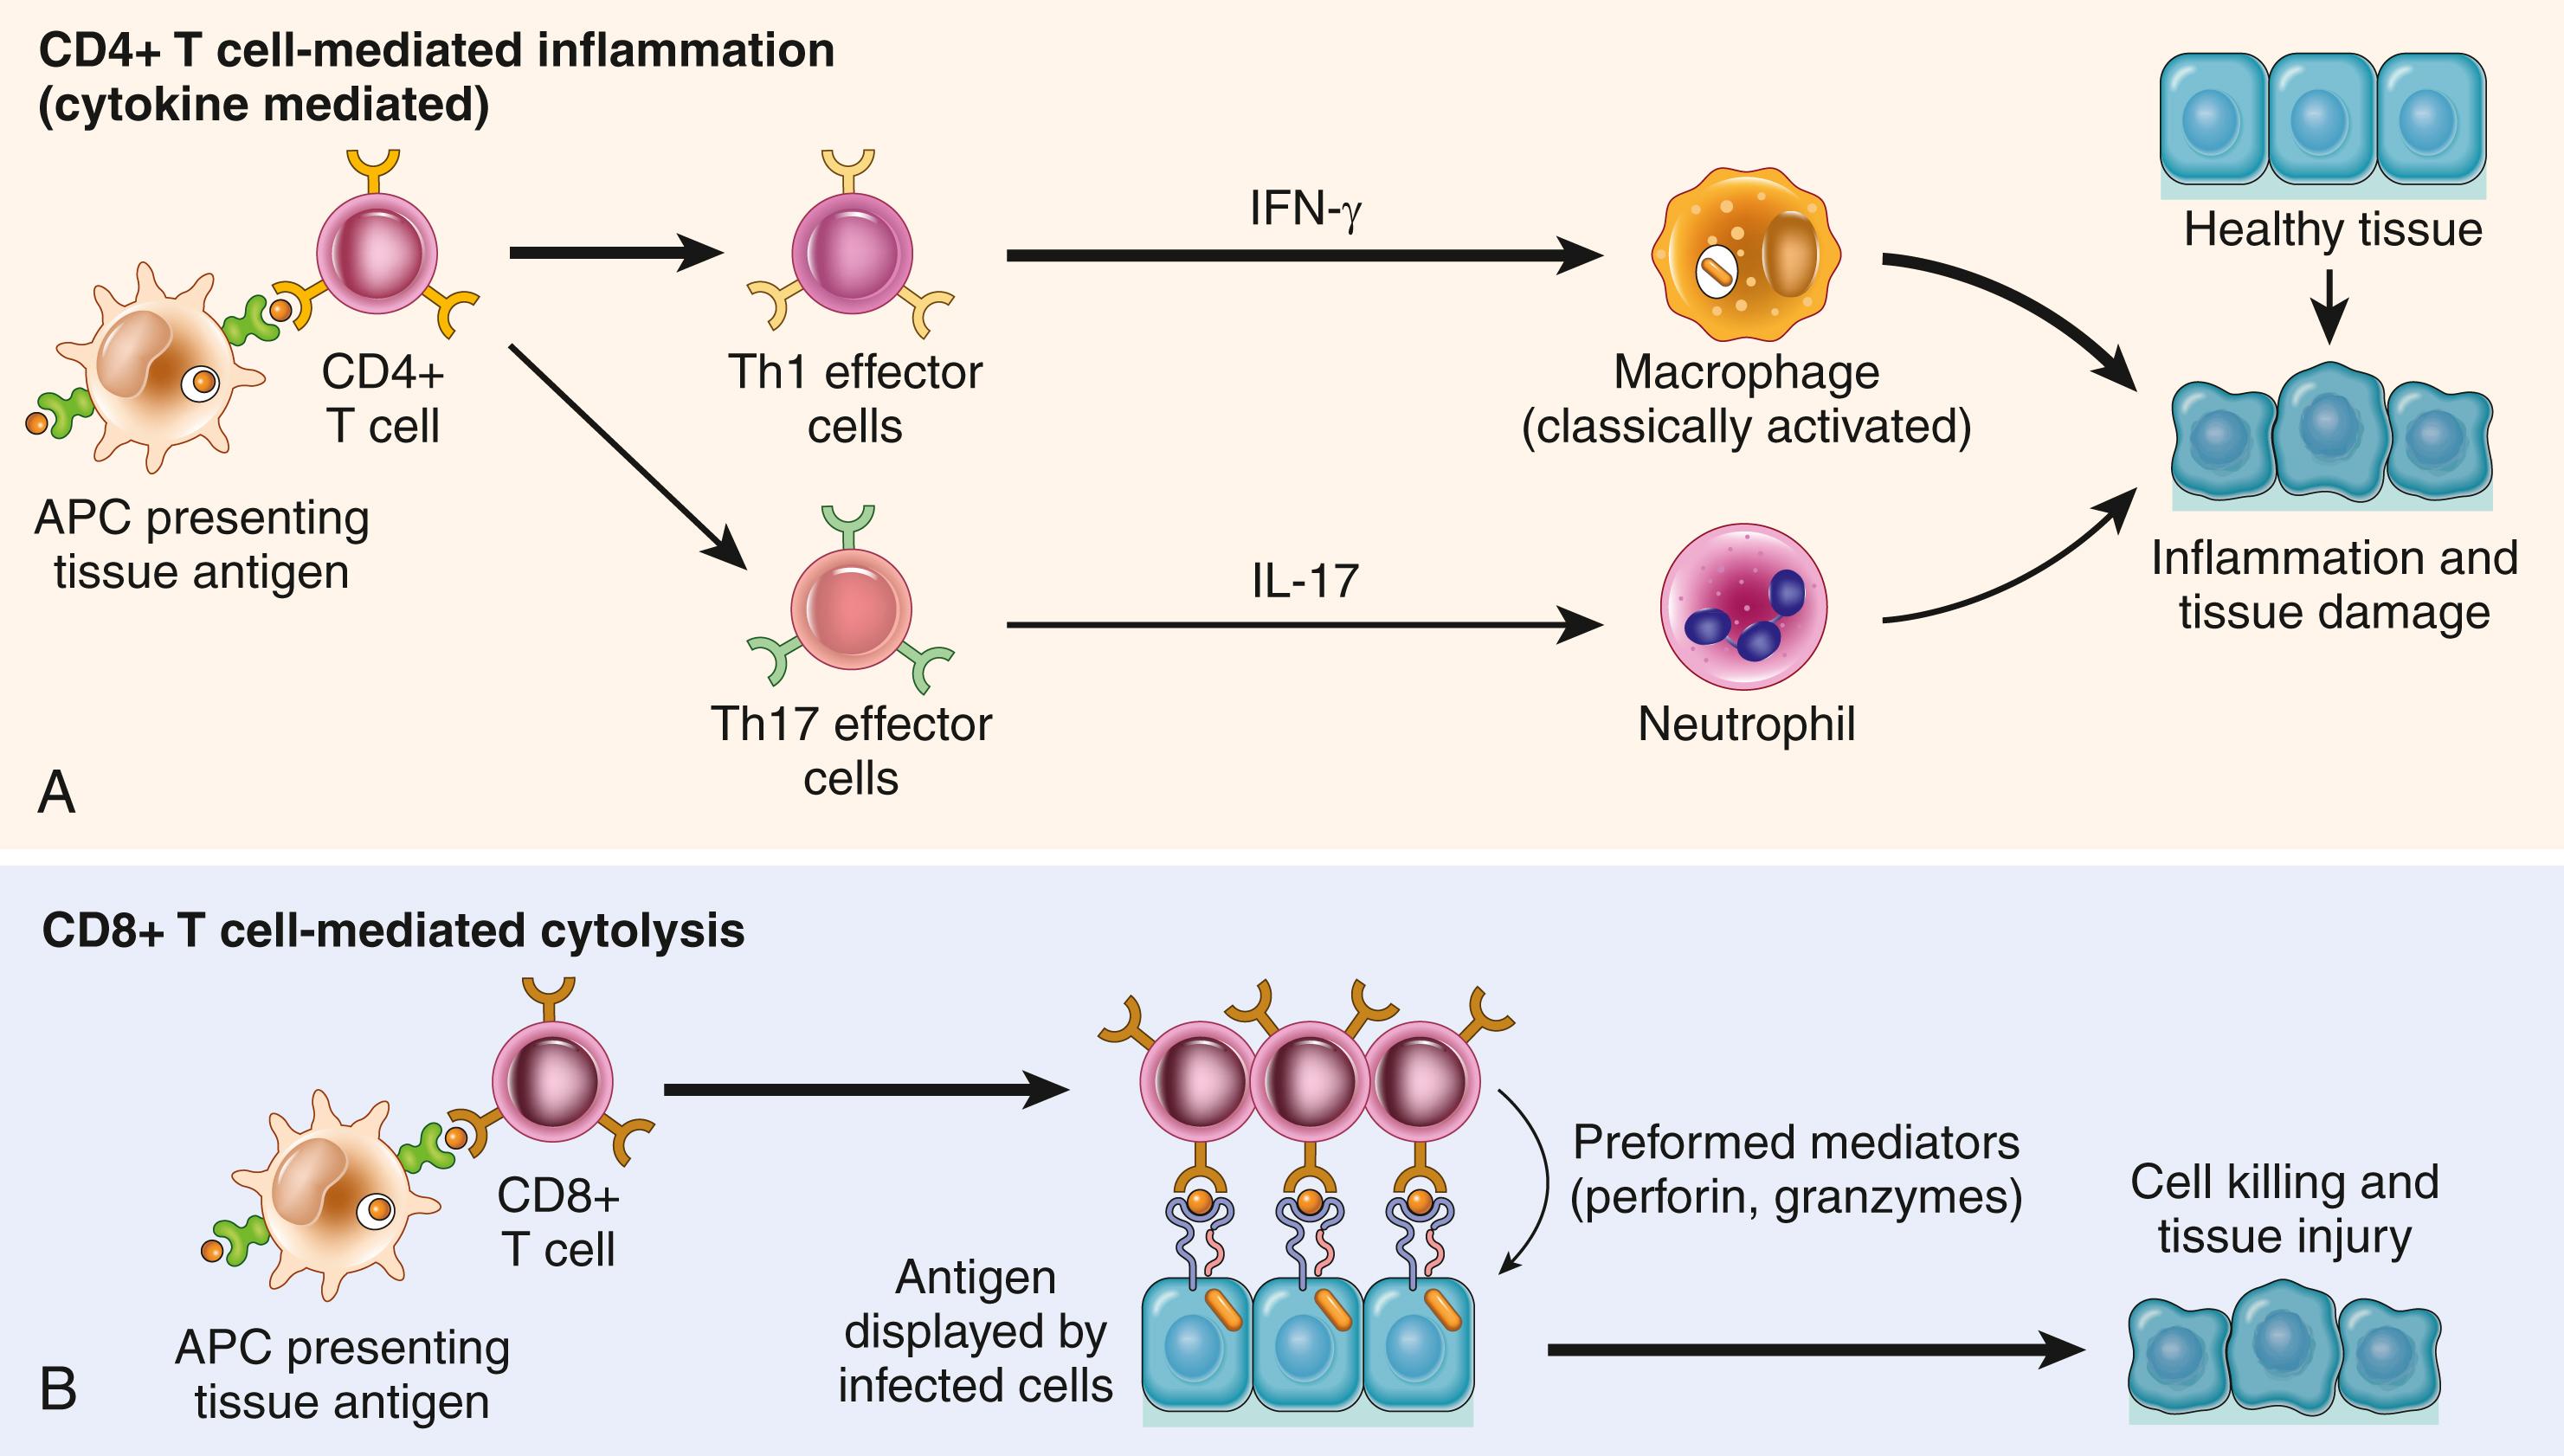 FIG. 5.14, Mechanisms of T cell–mediated (type IV) hypersensitivity reactions. (A) CD4+ Th1 cells (and sometimes CD8+ T cells, not shown ) respond to tissue antigens by secreting cytokines that stimulate inflammation and activate phagocytes, leading to tissue injury. CD4+ Th17 cells contribute to inflammation by recruiting neutrophils (and, to a lesser extent, monocytes). (B) In some diseases, CD8+ cytotoxic T lymphocytes (CTLs) directly kill tissue cells expressing intracellular antigens (shown as orange bars inside cells). APC, Antigen-presenting cell.